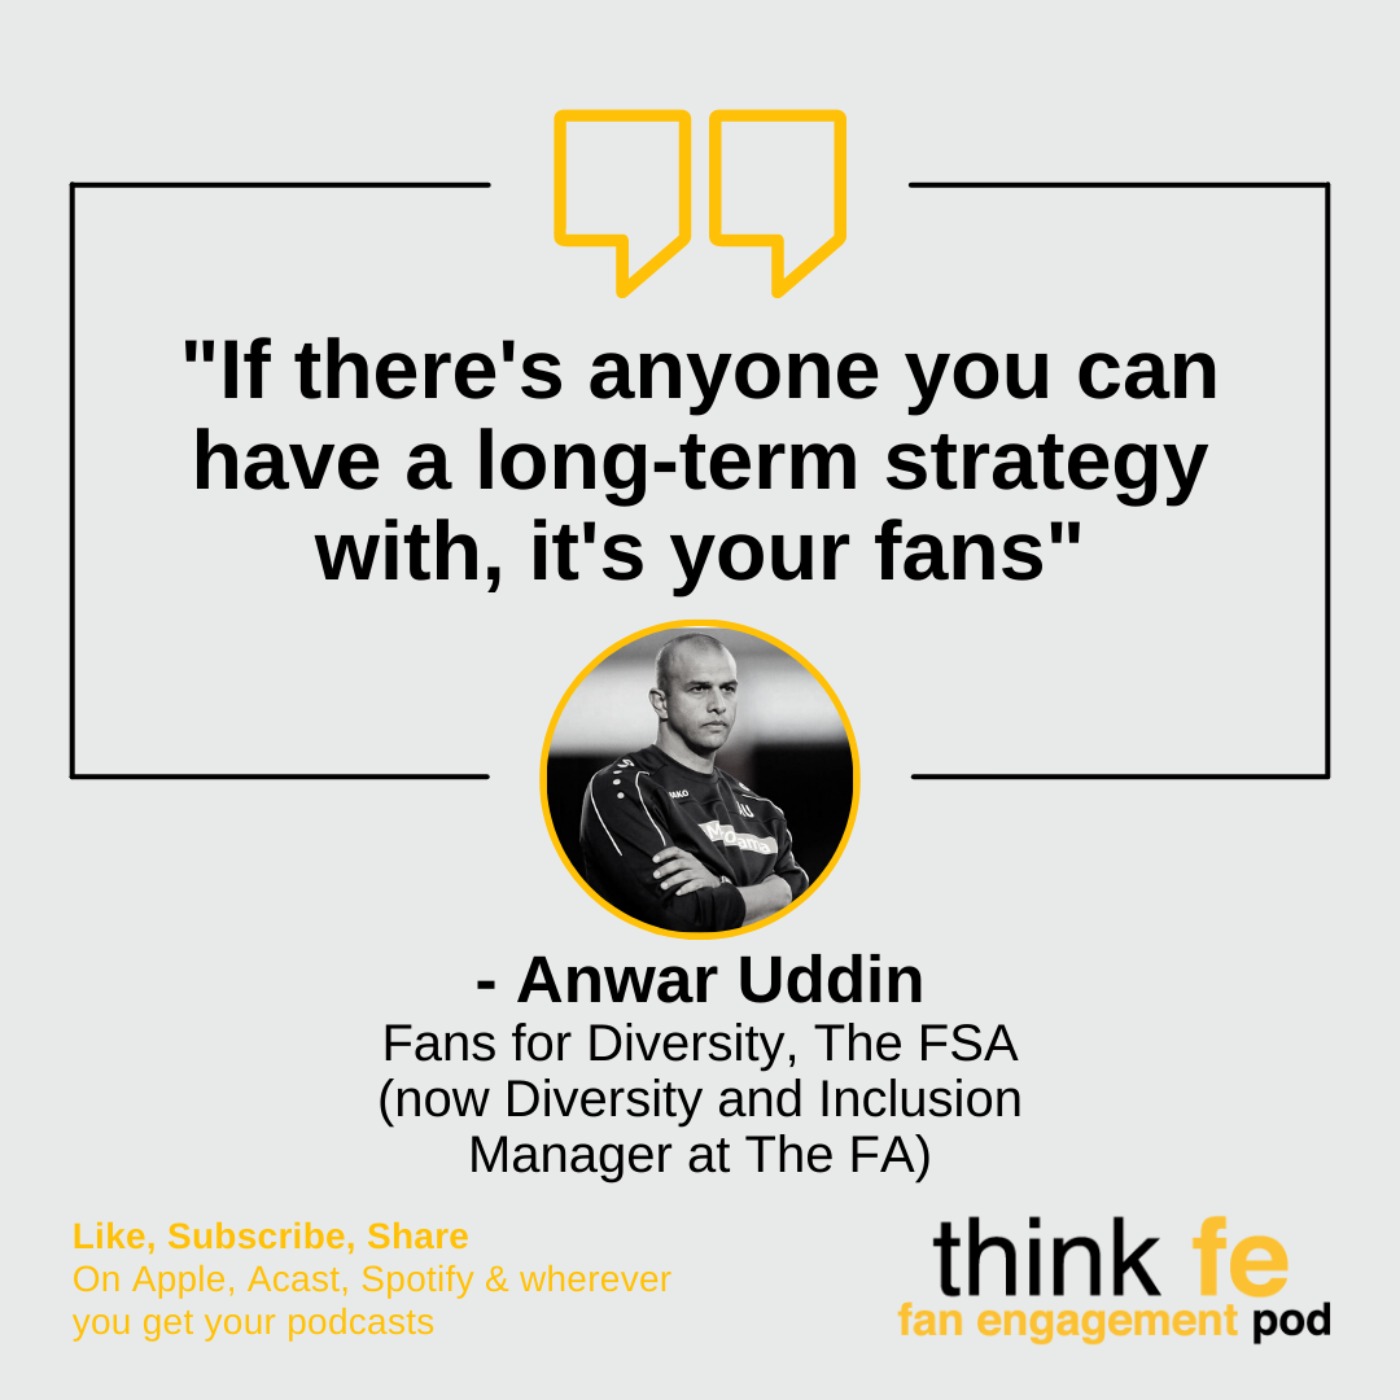 Creating new traditions with Anwar Uddin/Fans for Diversity